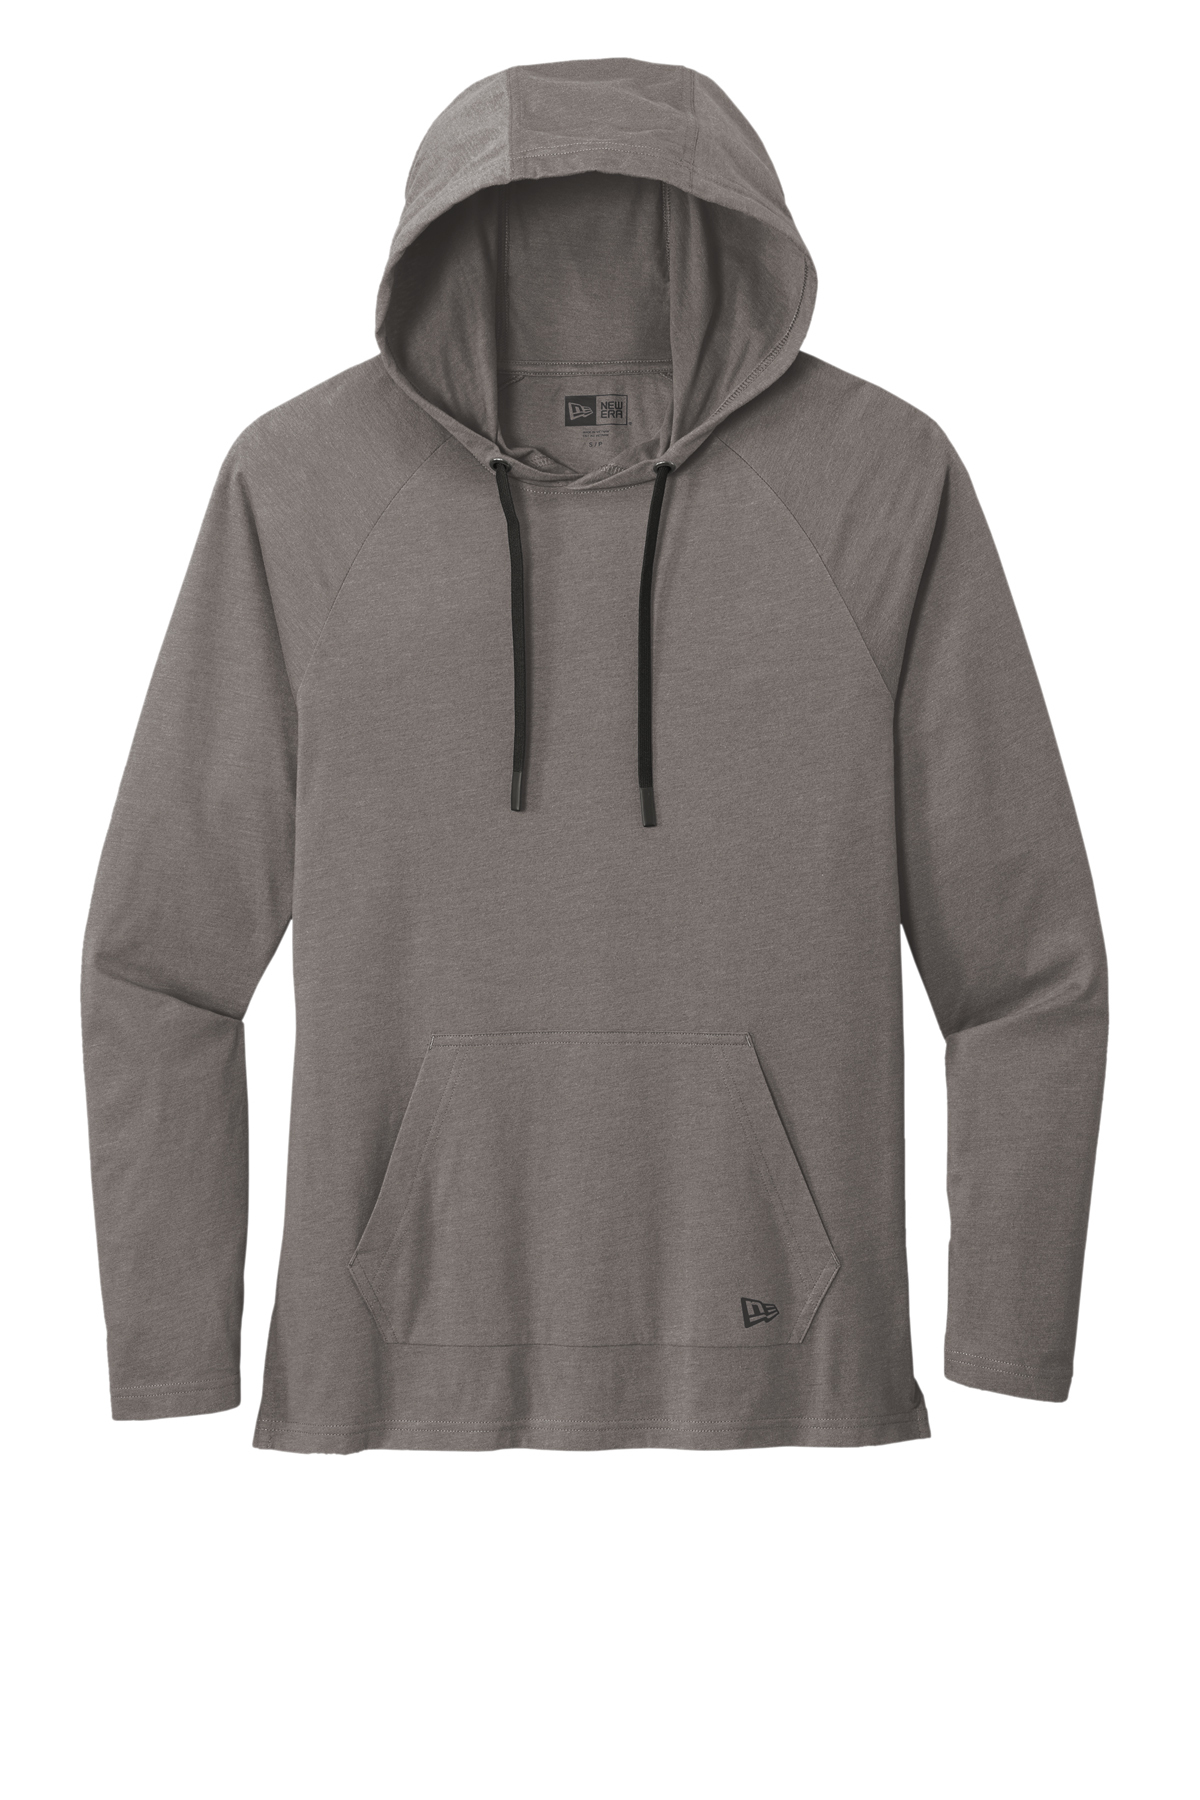 New Era Tri-Blend Hoodie | Product | Company Casuals